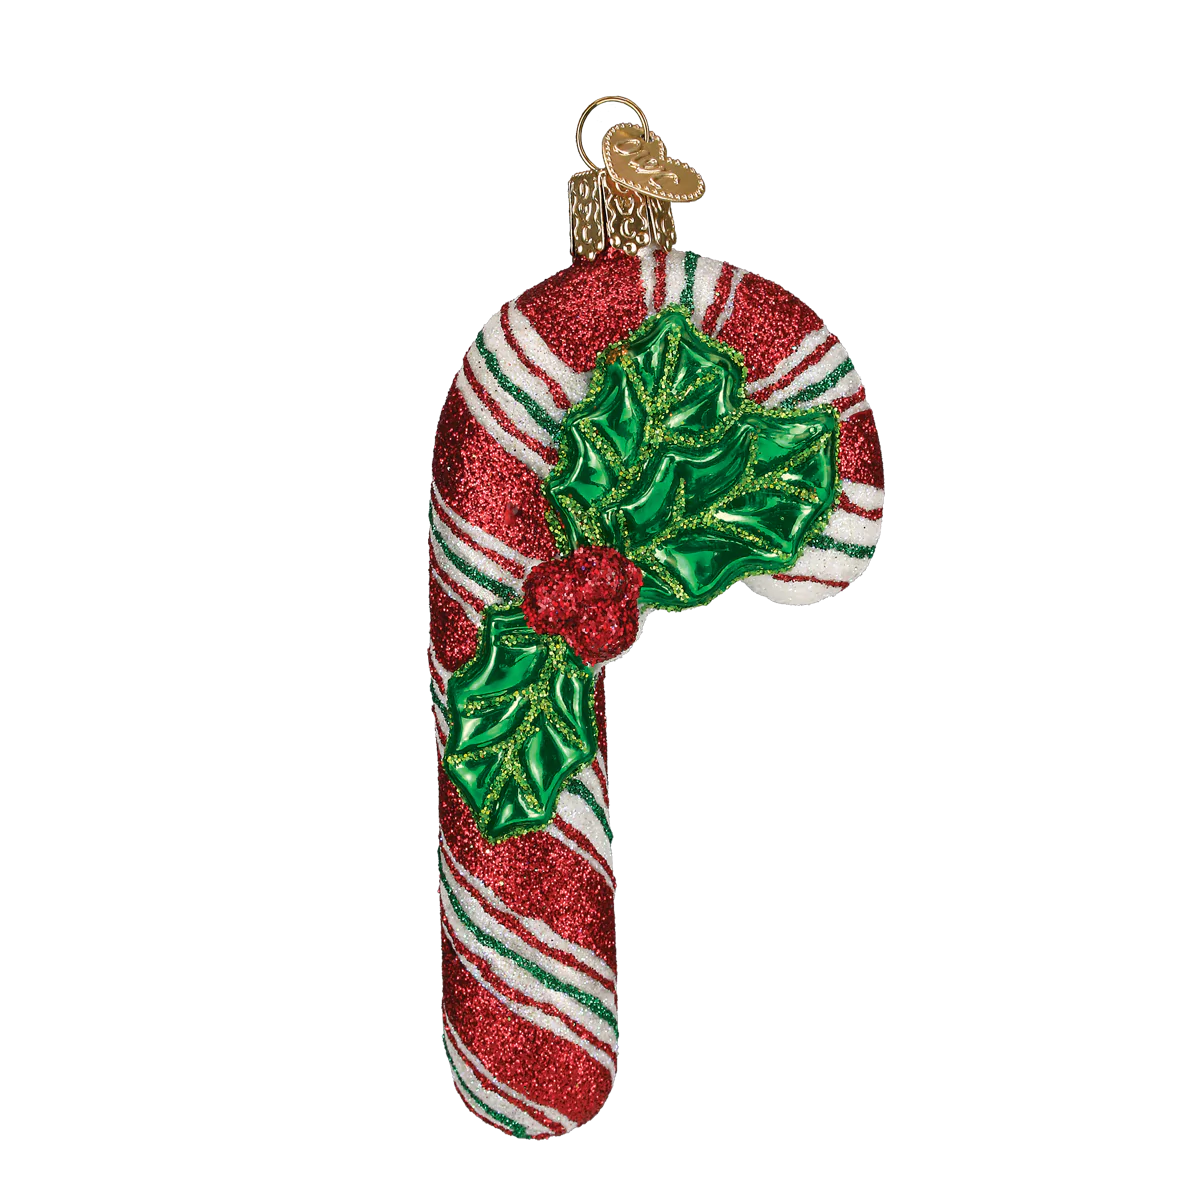 Glistening Candy Cane Ornament  Old World Christmas   